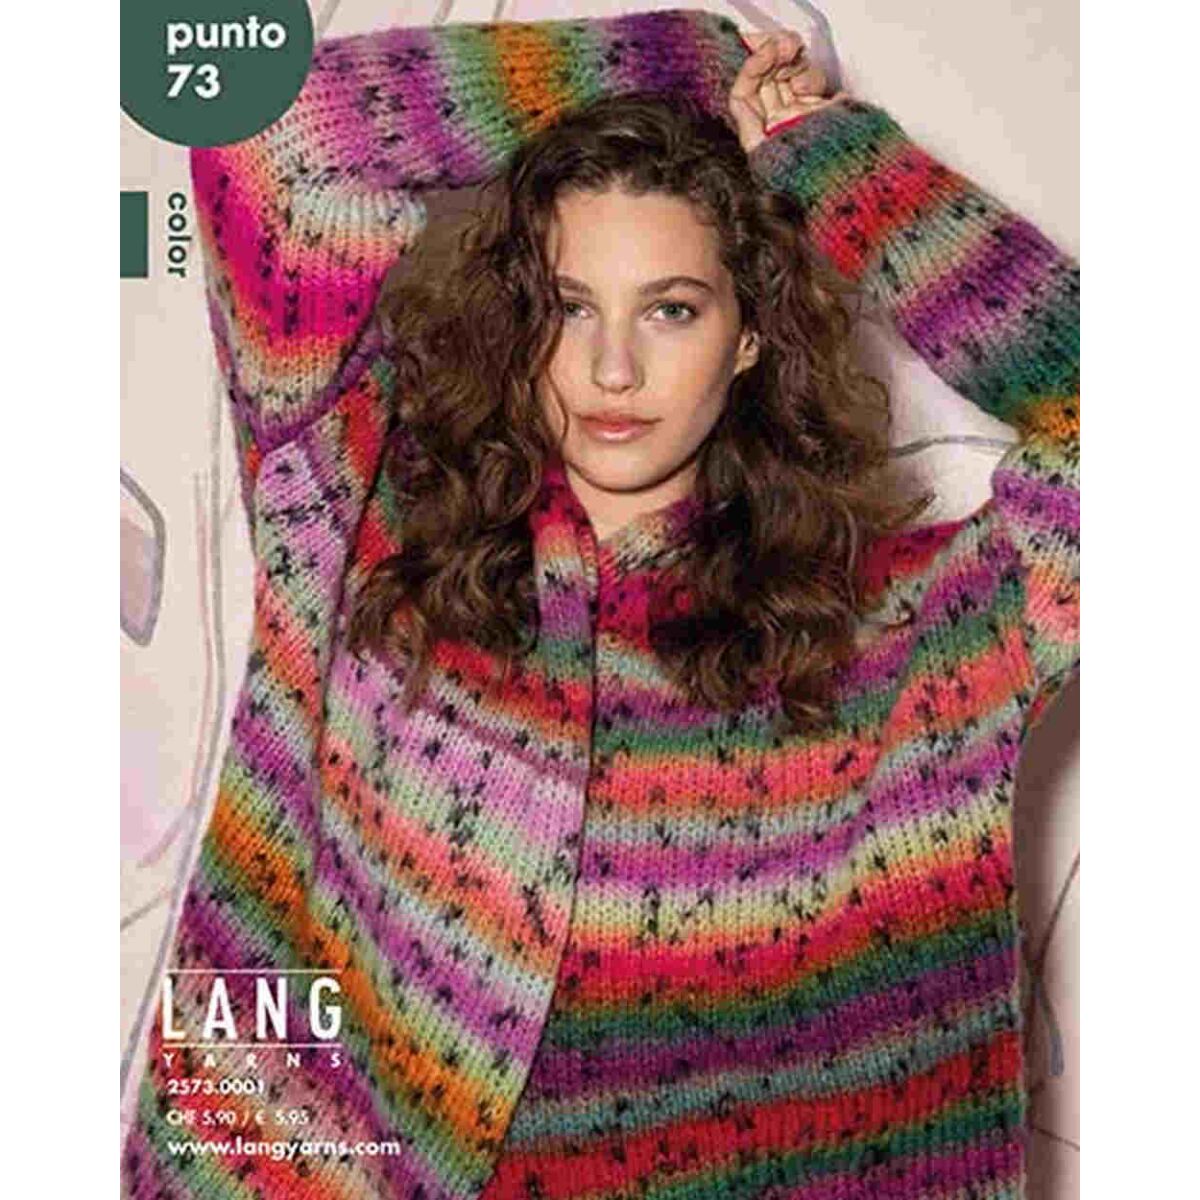 LANG YARNS Punto 73 COLOR LY.25730001 Zeitschriften